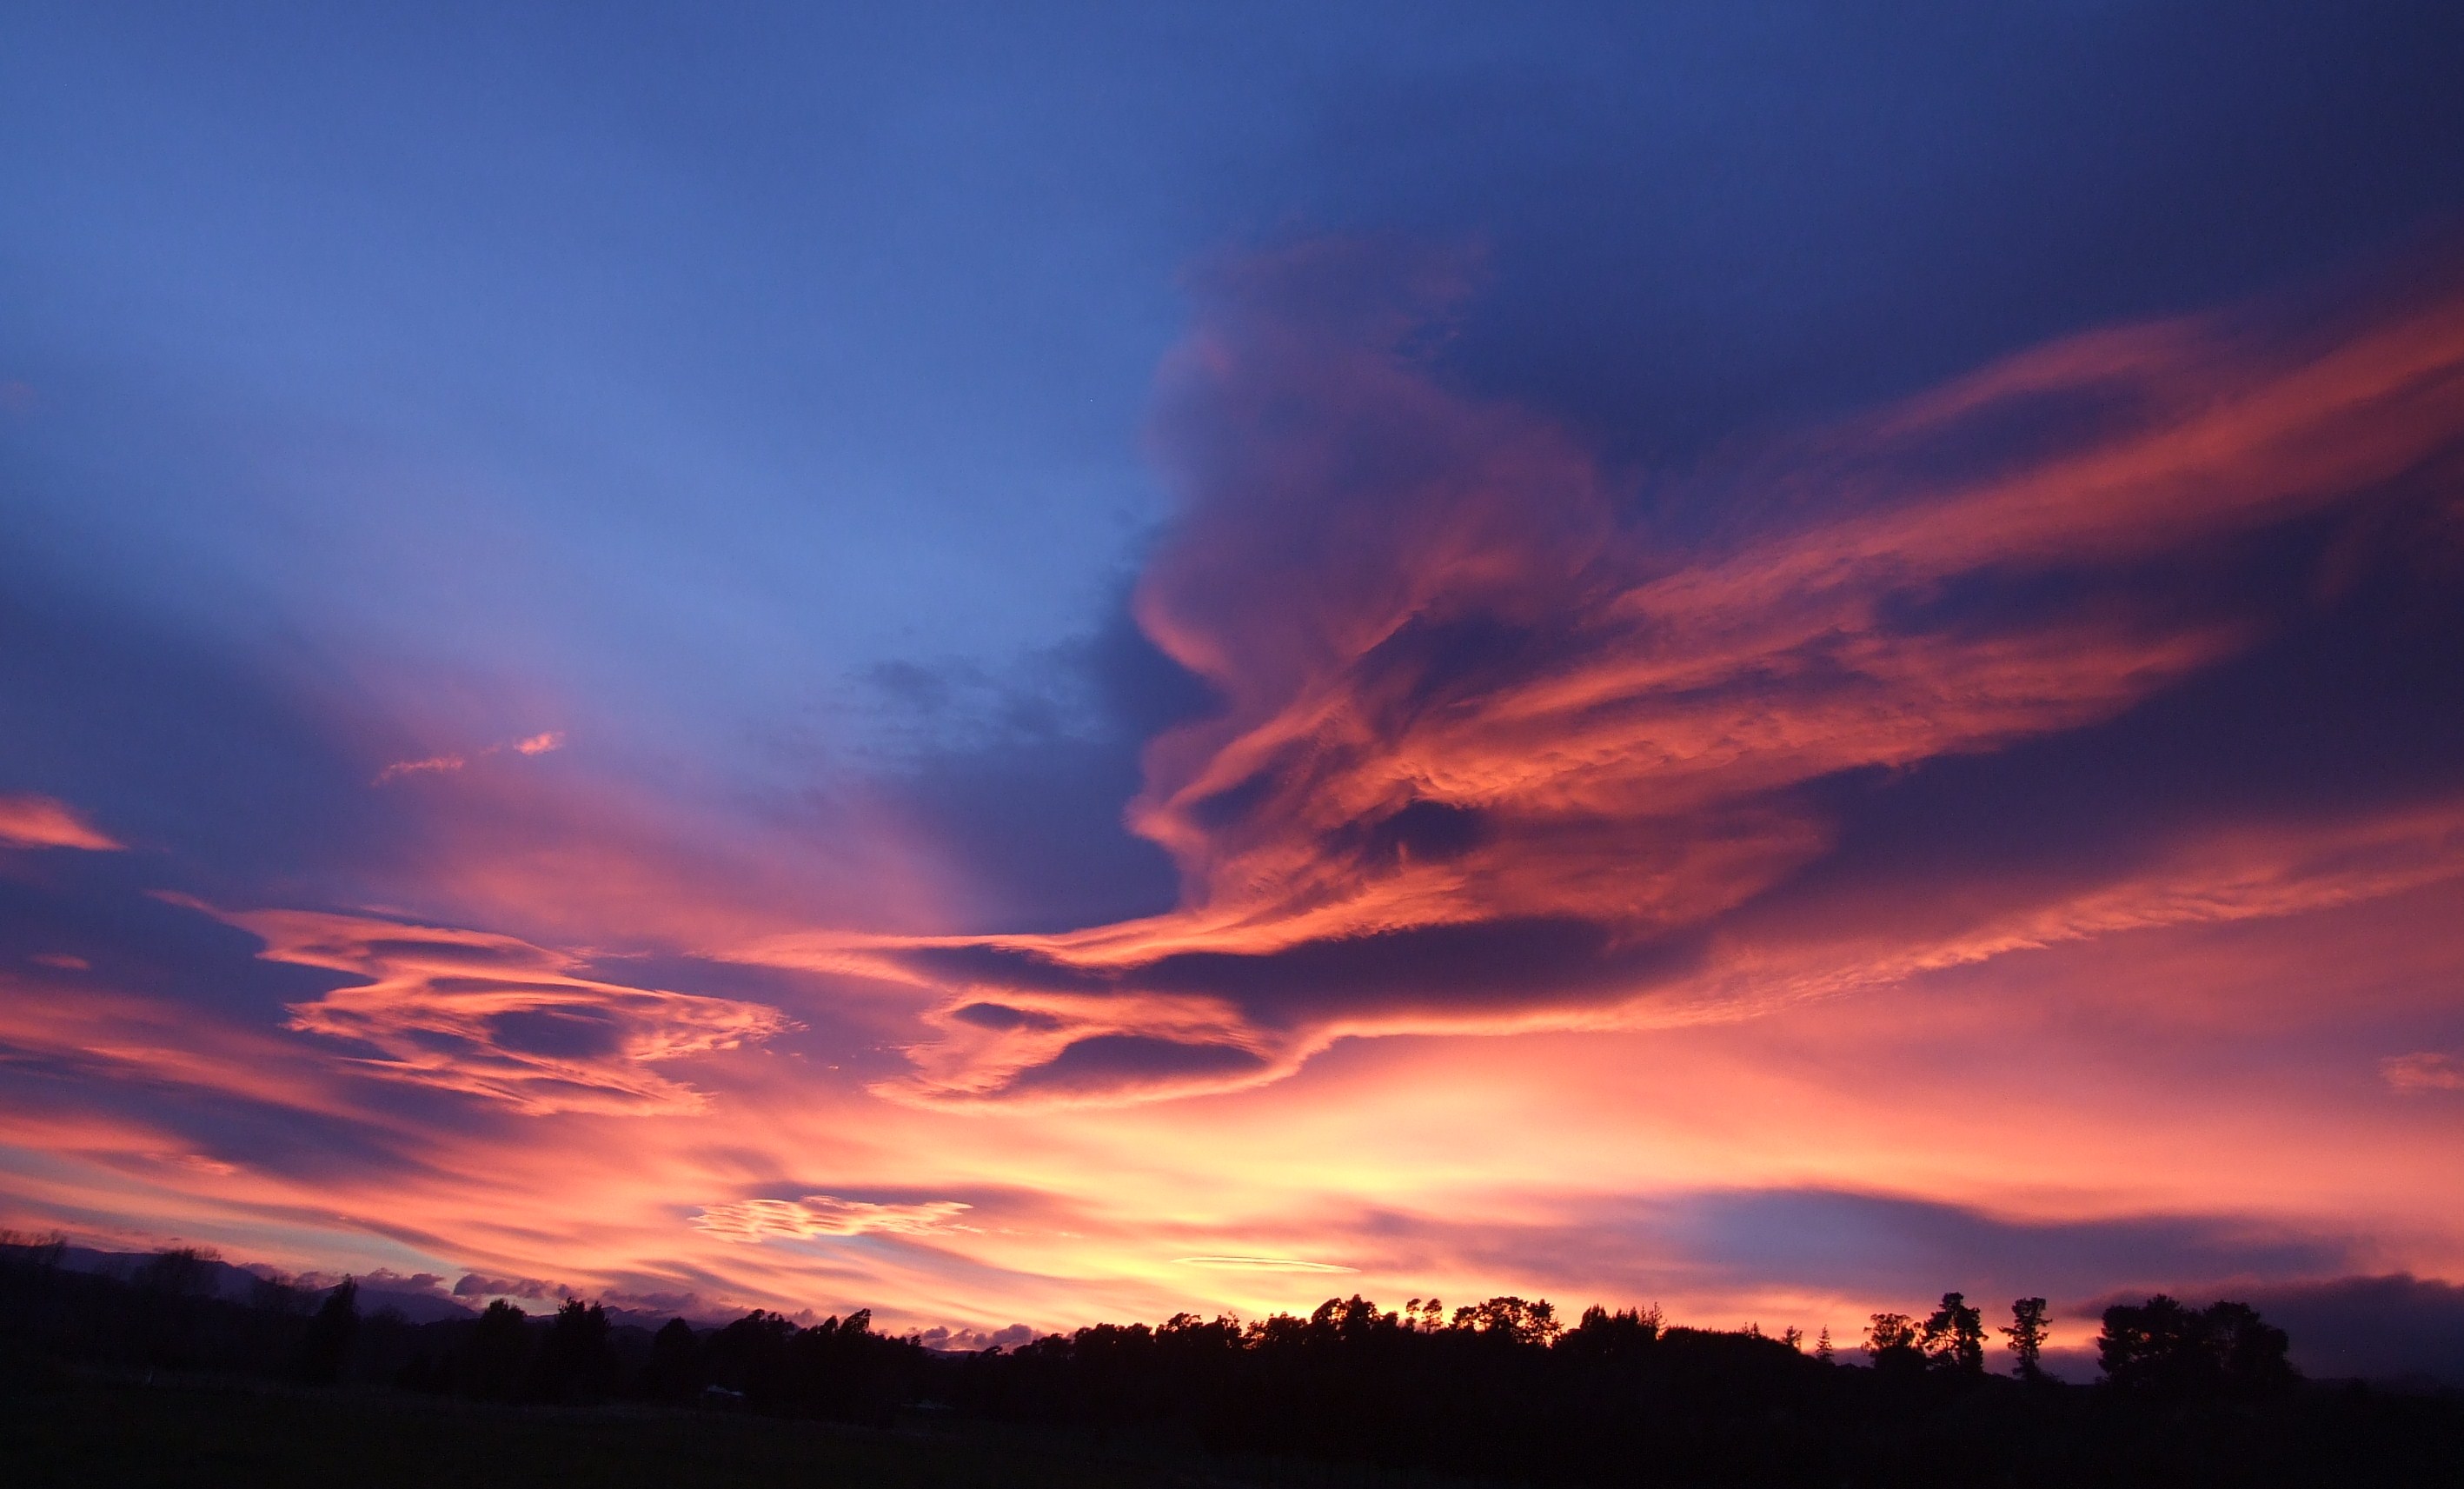 Full sky photo – red sky and picture clouds. | everysensory and Star Kin